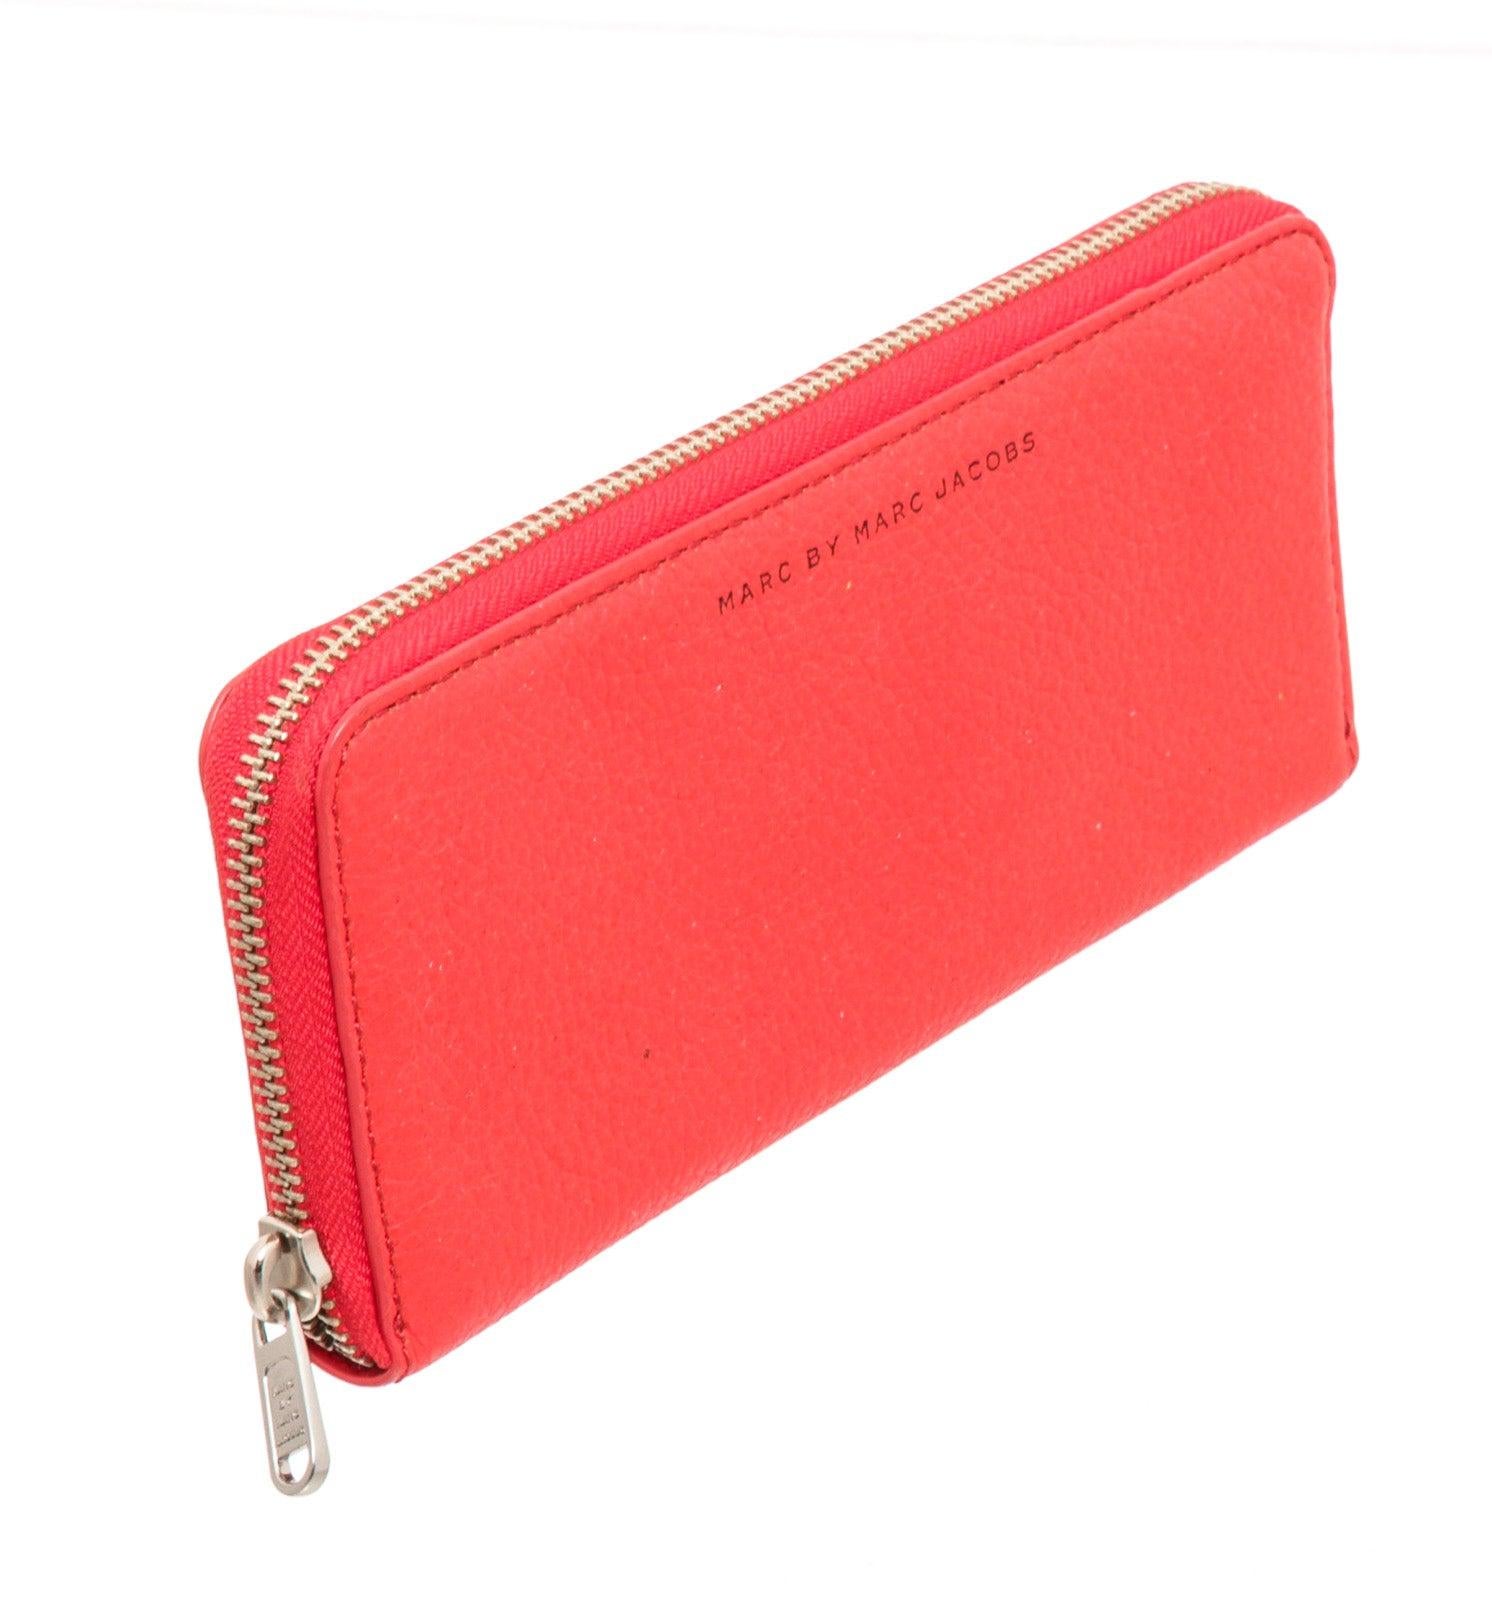 Marc By Marc Jacobs red leather zippy wallet with Silver-tone hardware, red leather interior lining, five interior pockets; one with zip closure, eight card slots and overall zip around closure.  25204MSC